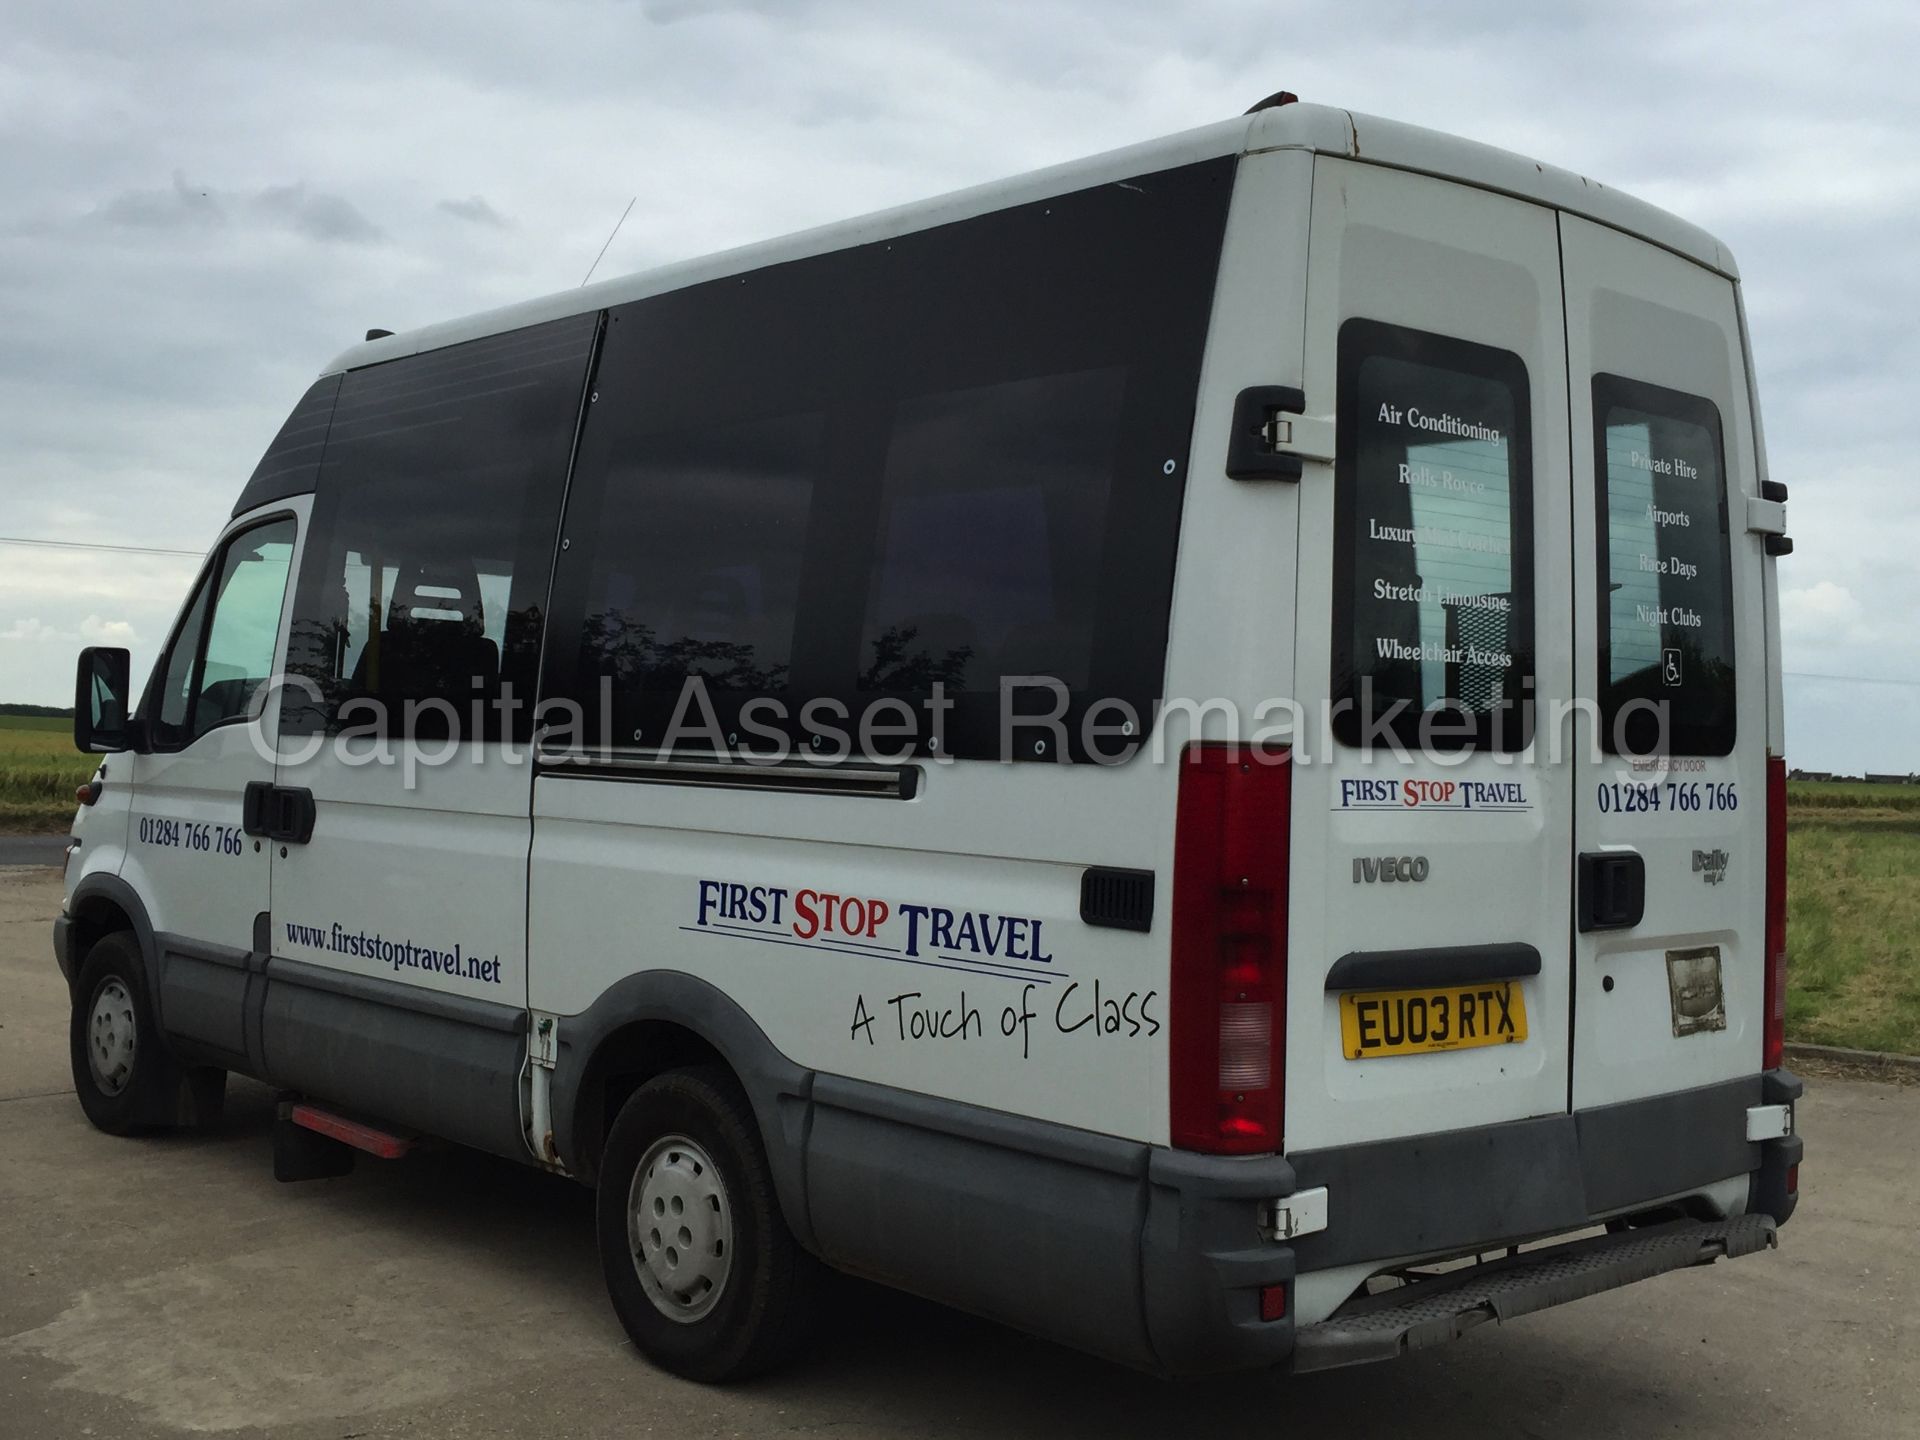 (on sale) IVECO DAILY 35S13 '14 SEATER MINI-BUS' (2003 - 03 REG) '2.3 DIESEL - 6 SPEED' (NO VAT) - Image 5 of 23